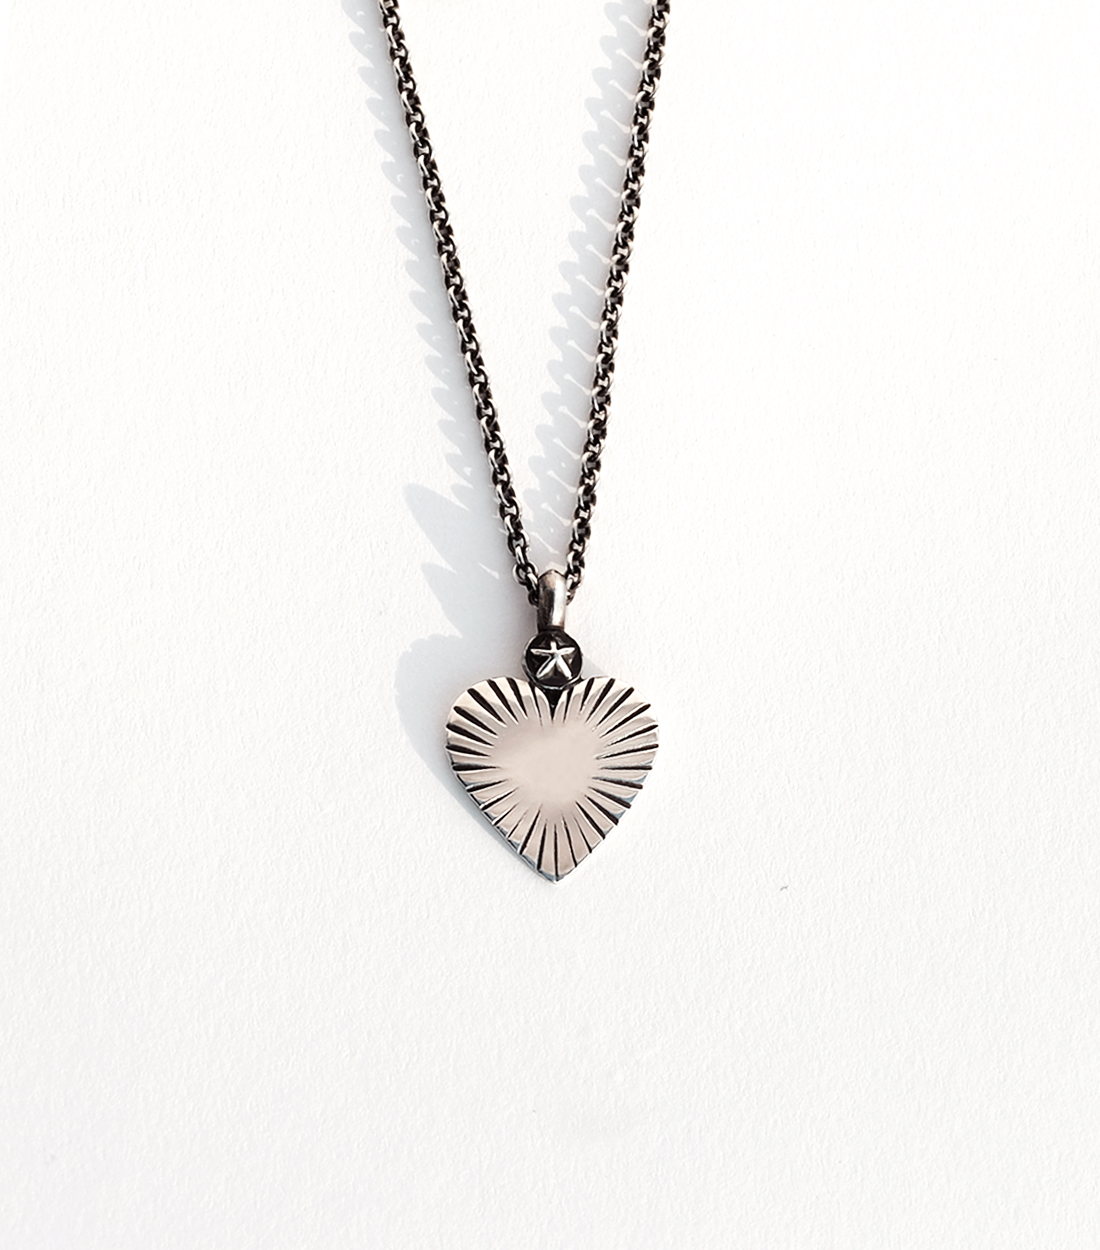 Heart and Star Necklace